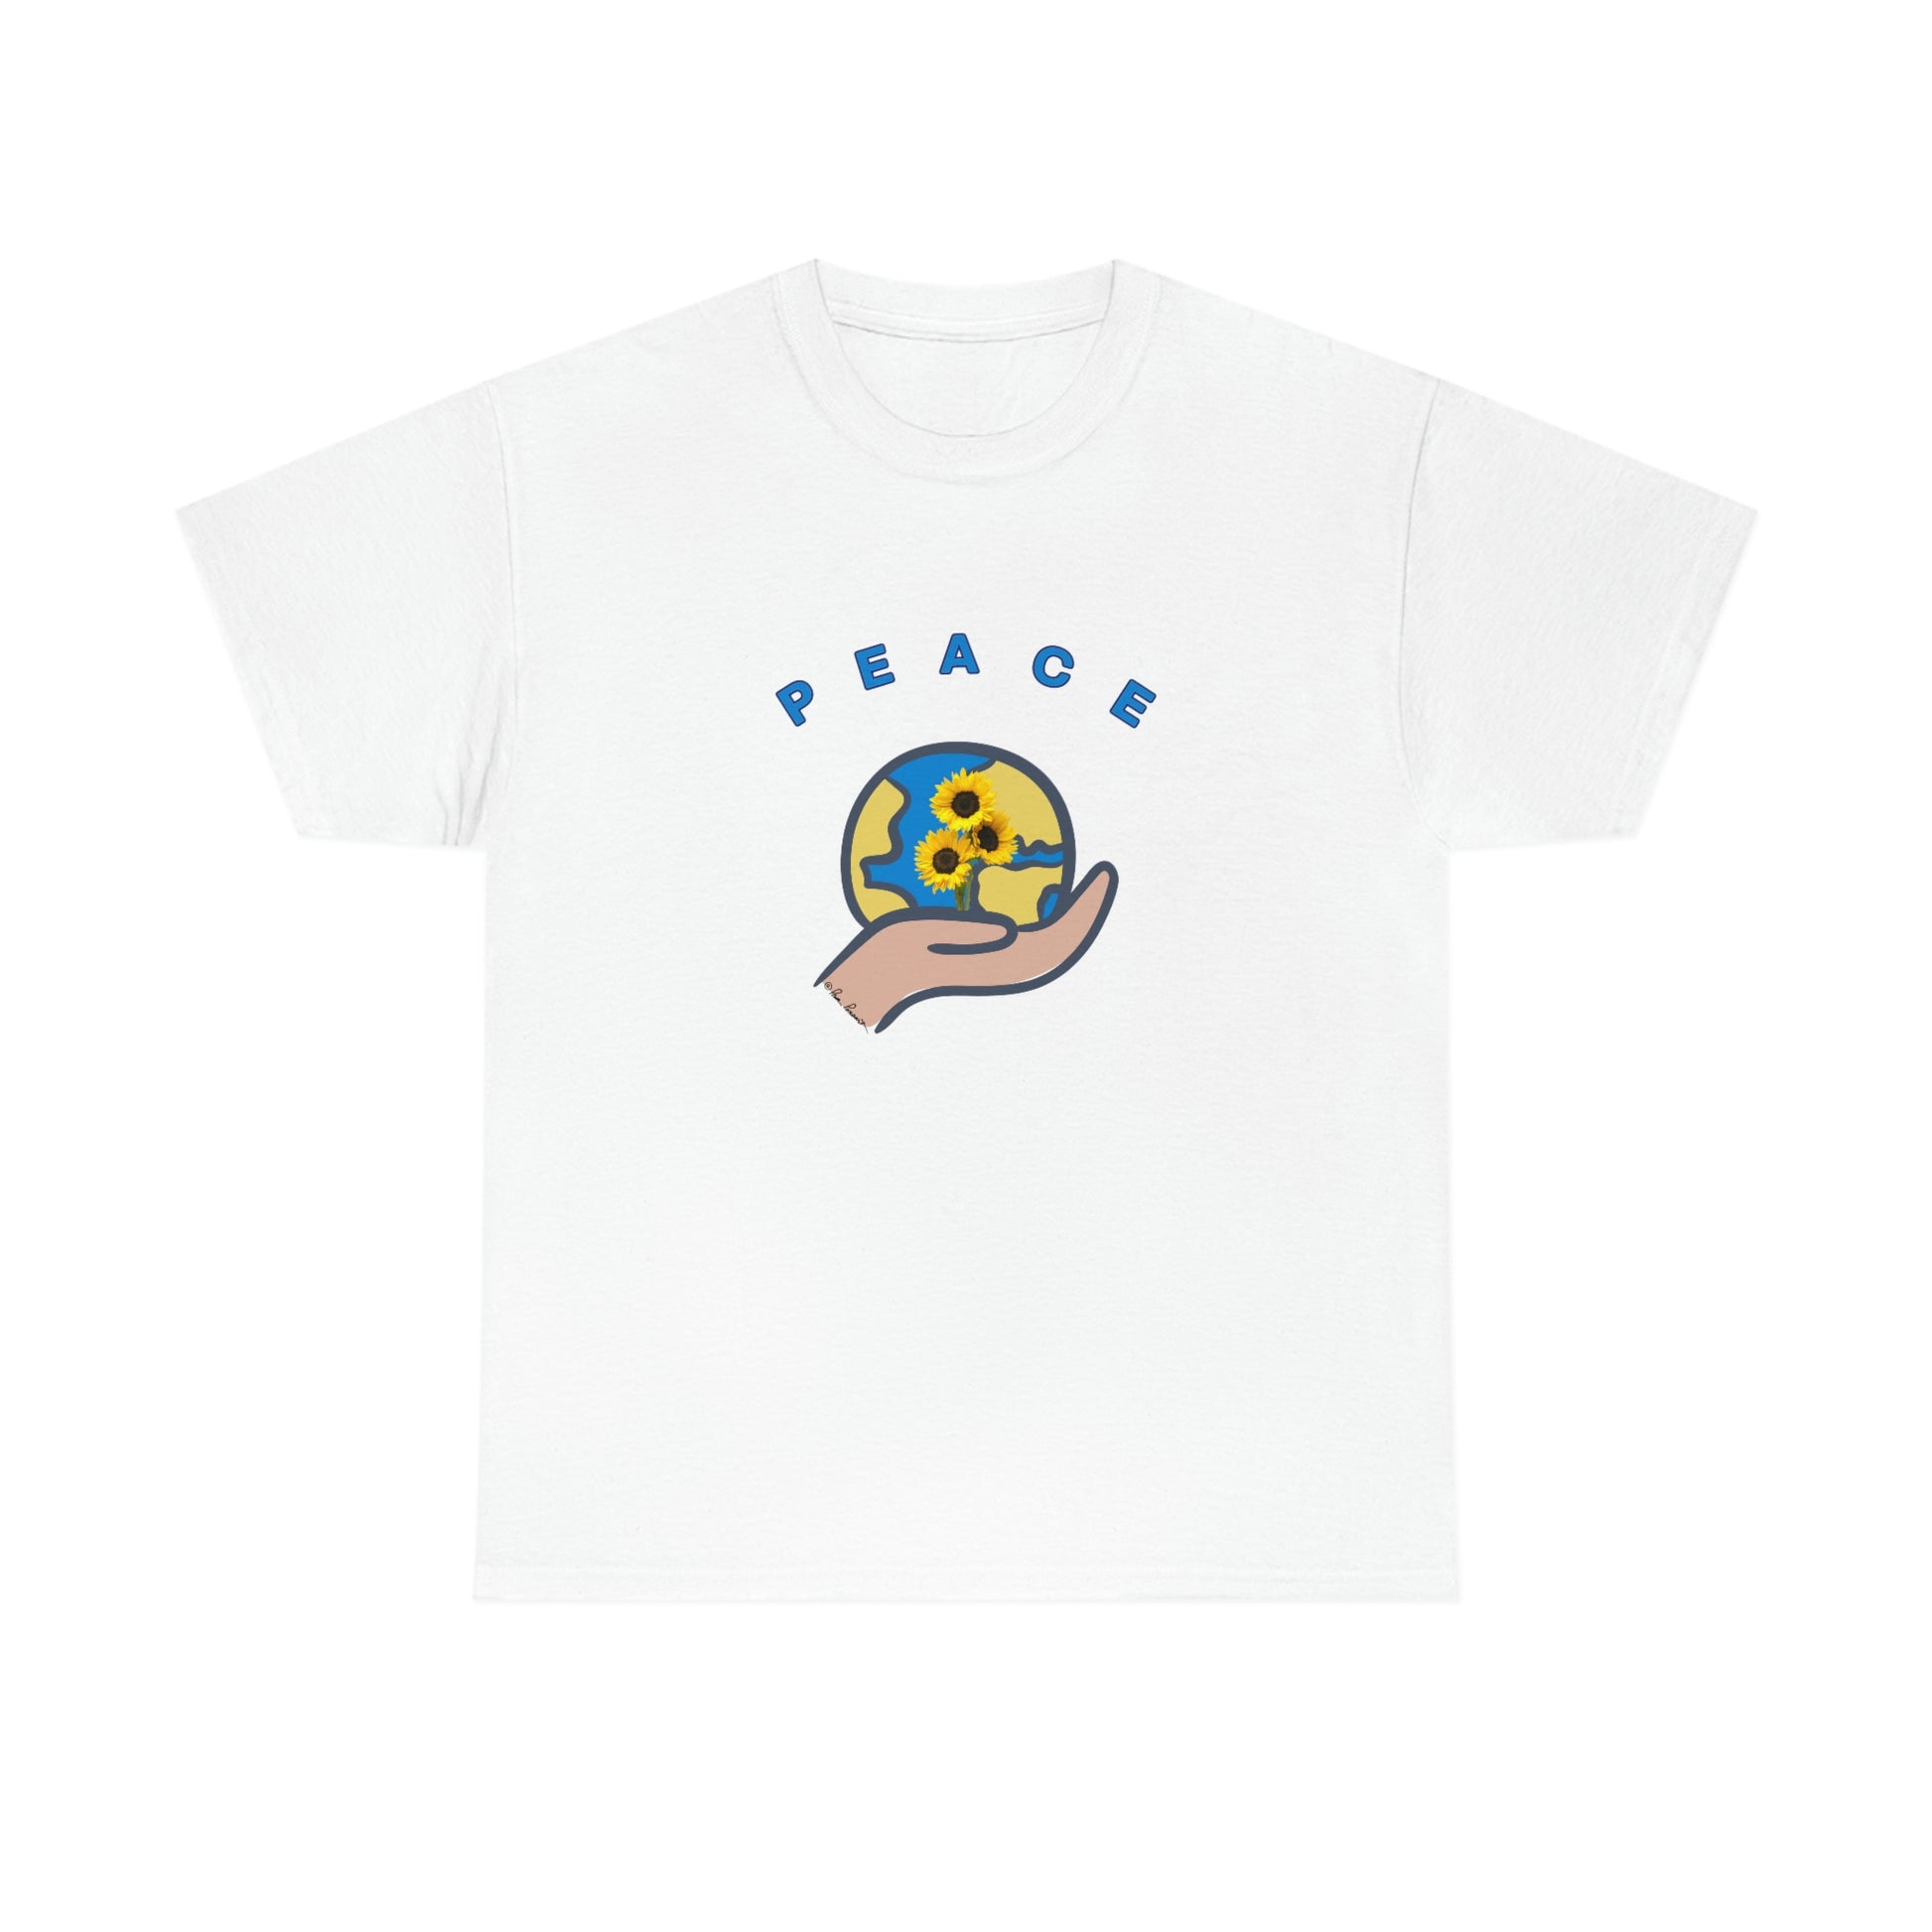 Flat front view of the white t-shirt